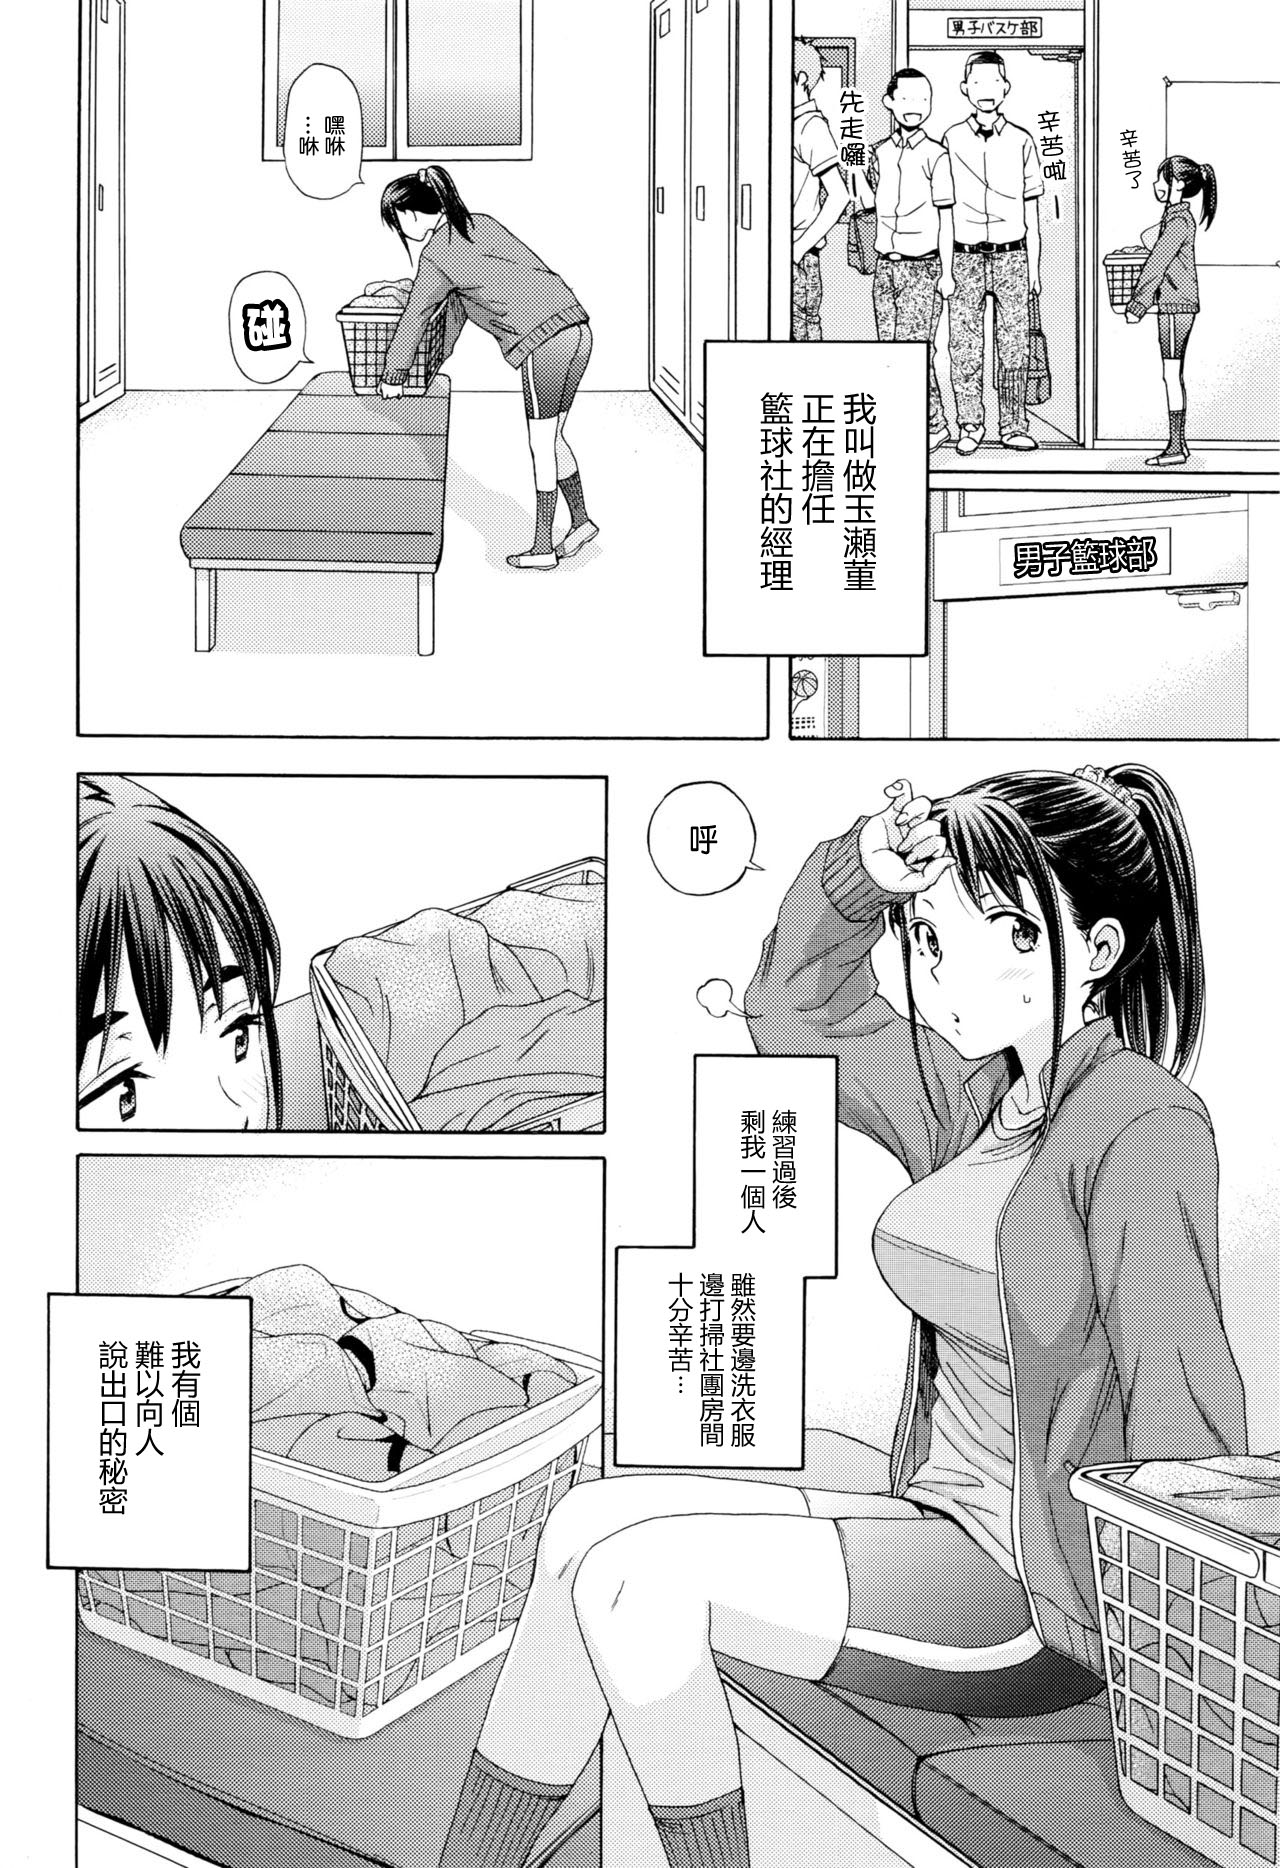 [Coelacanth] Kanzen Shiai - The Perfect Game (COMIC Megastore Alpha 2016-06) [Chinese] [最愛路易絲澪漢化組] page 2 full